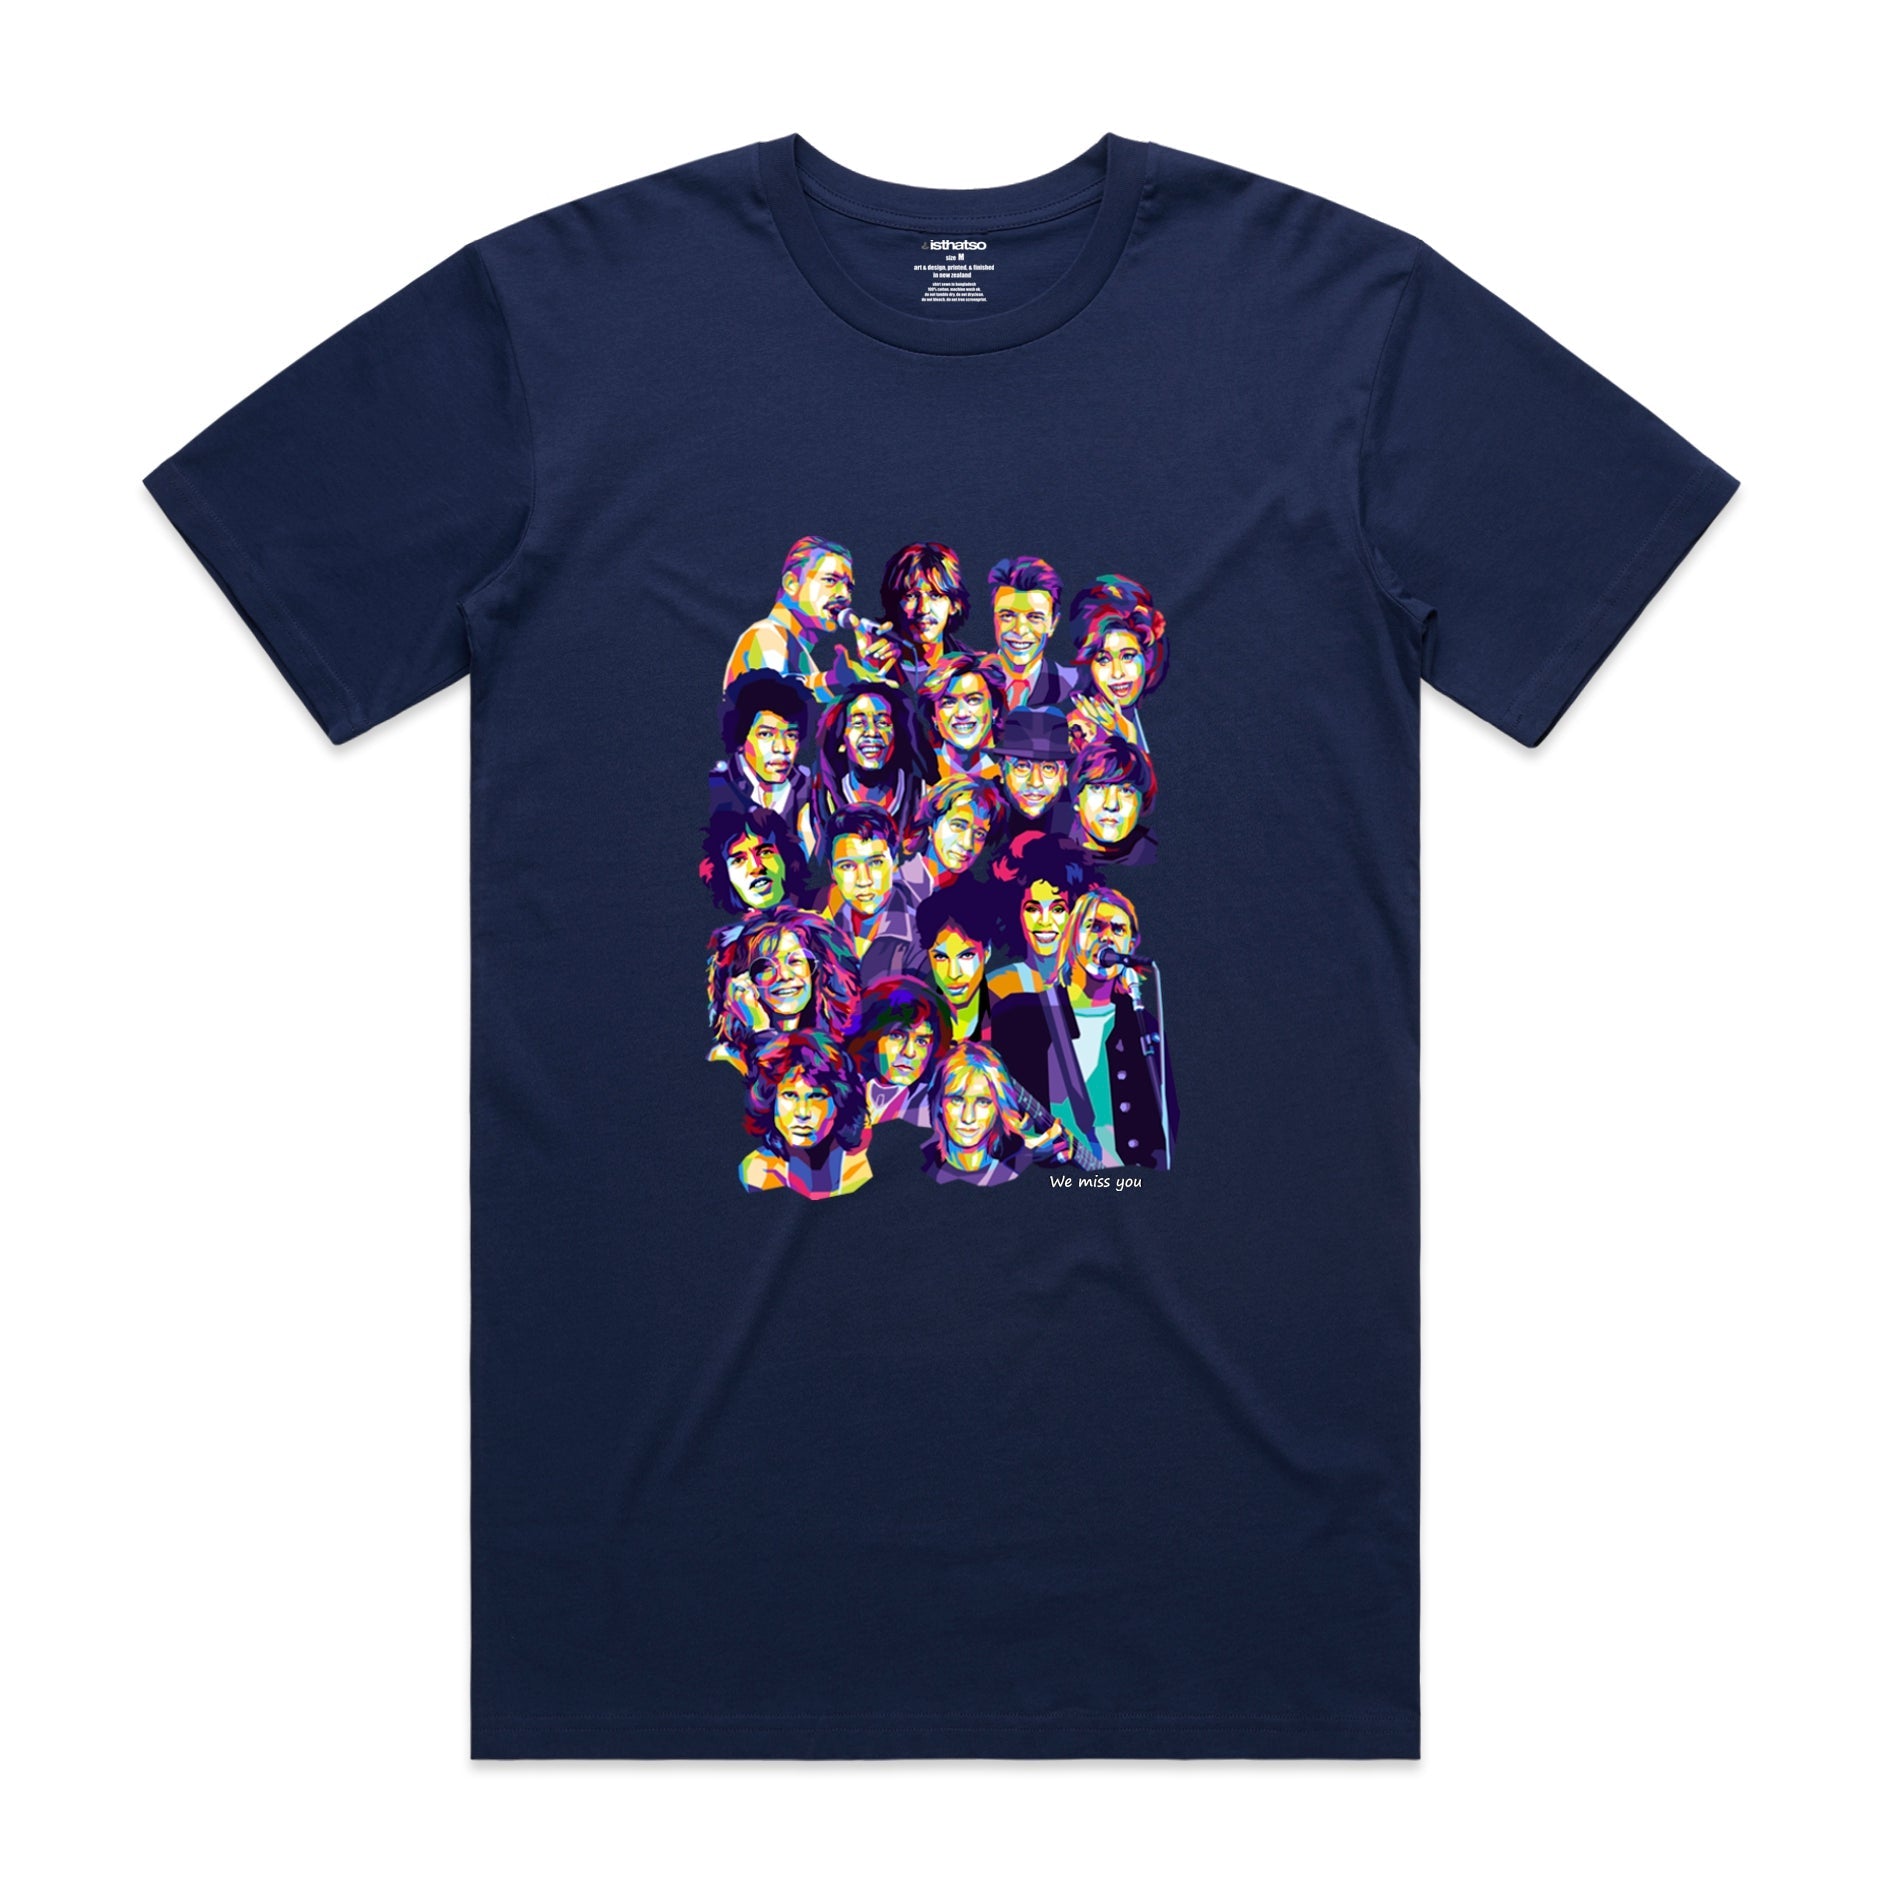 Isthatso - We Miss You SS Tee - Dark Blue